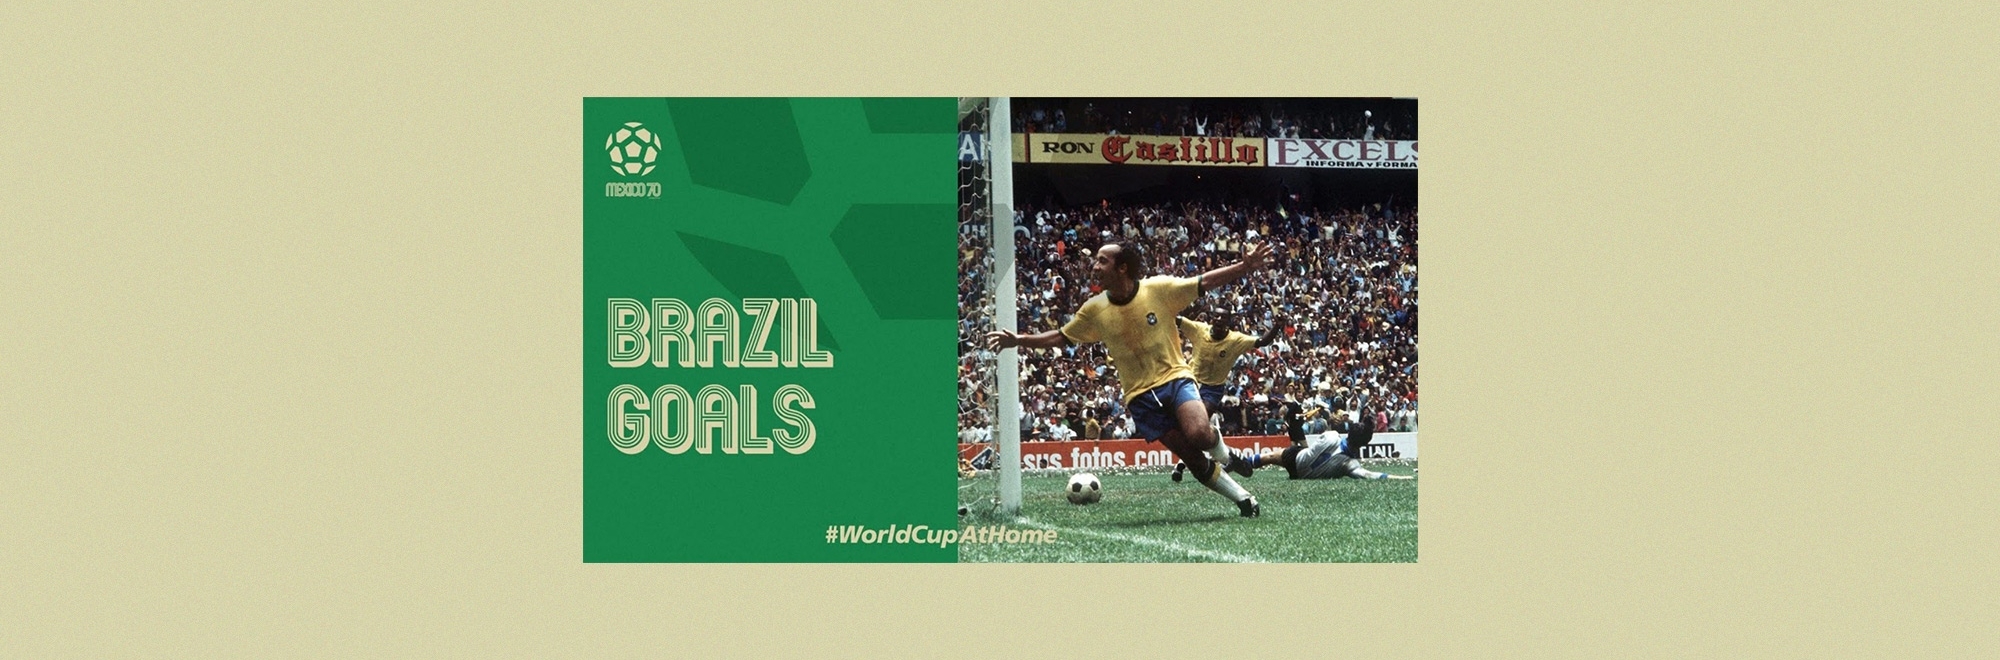 FIFA reminisce about better times with this nostalgic campaign made possible with modern-day techniques